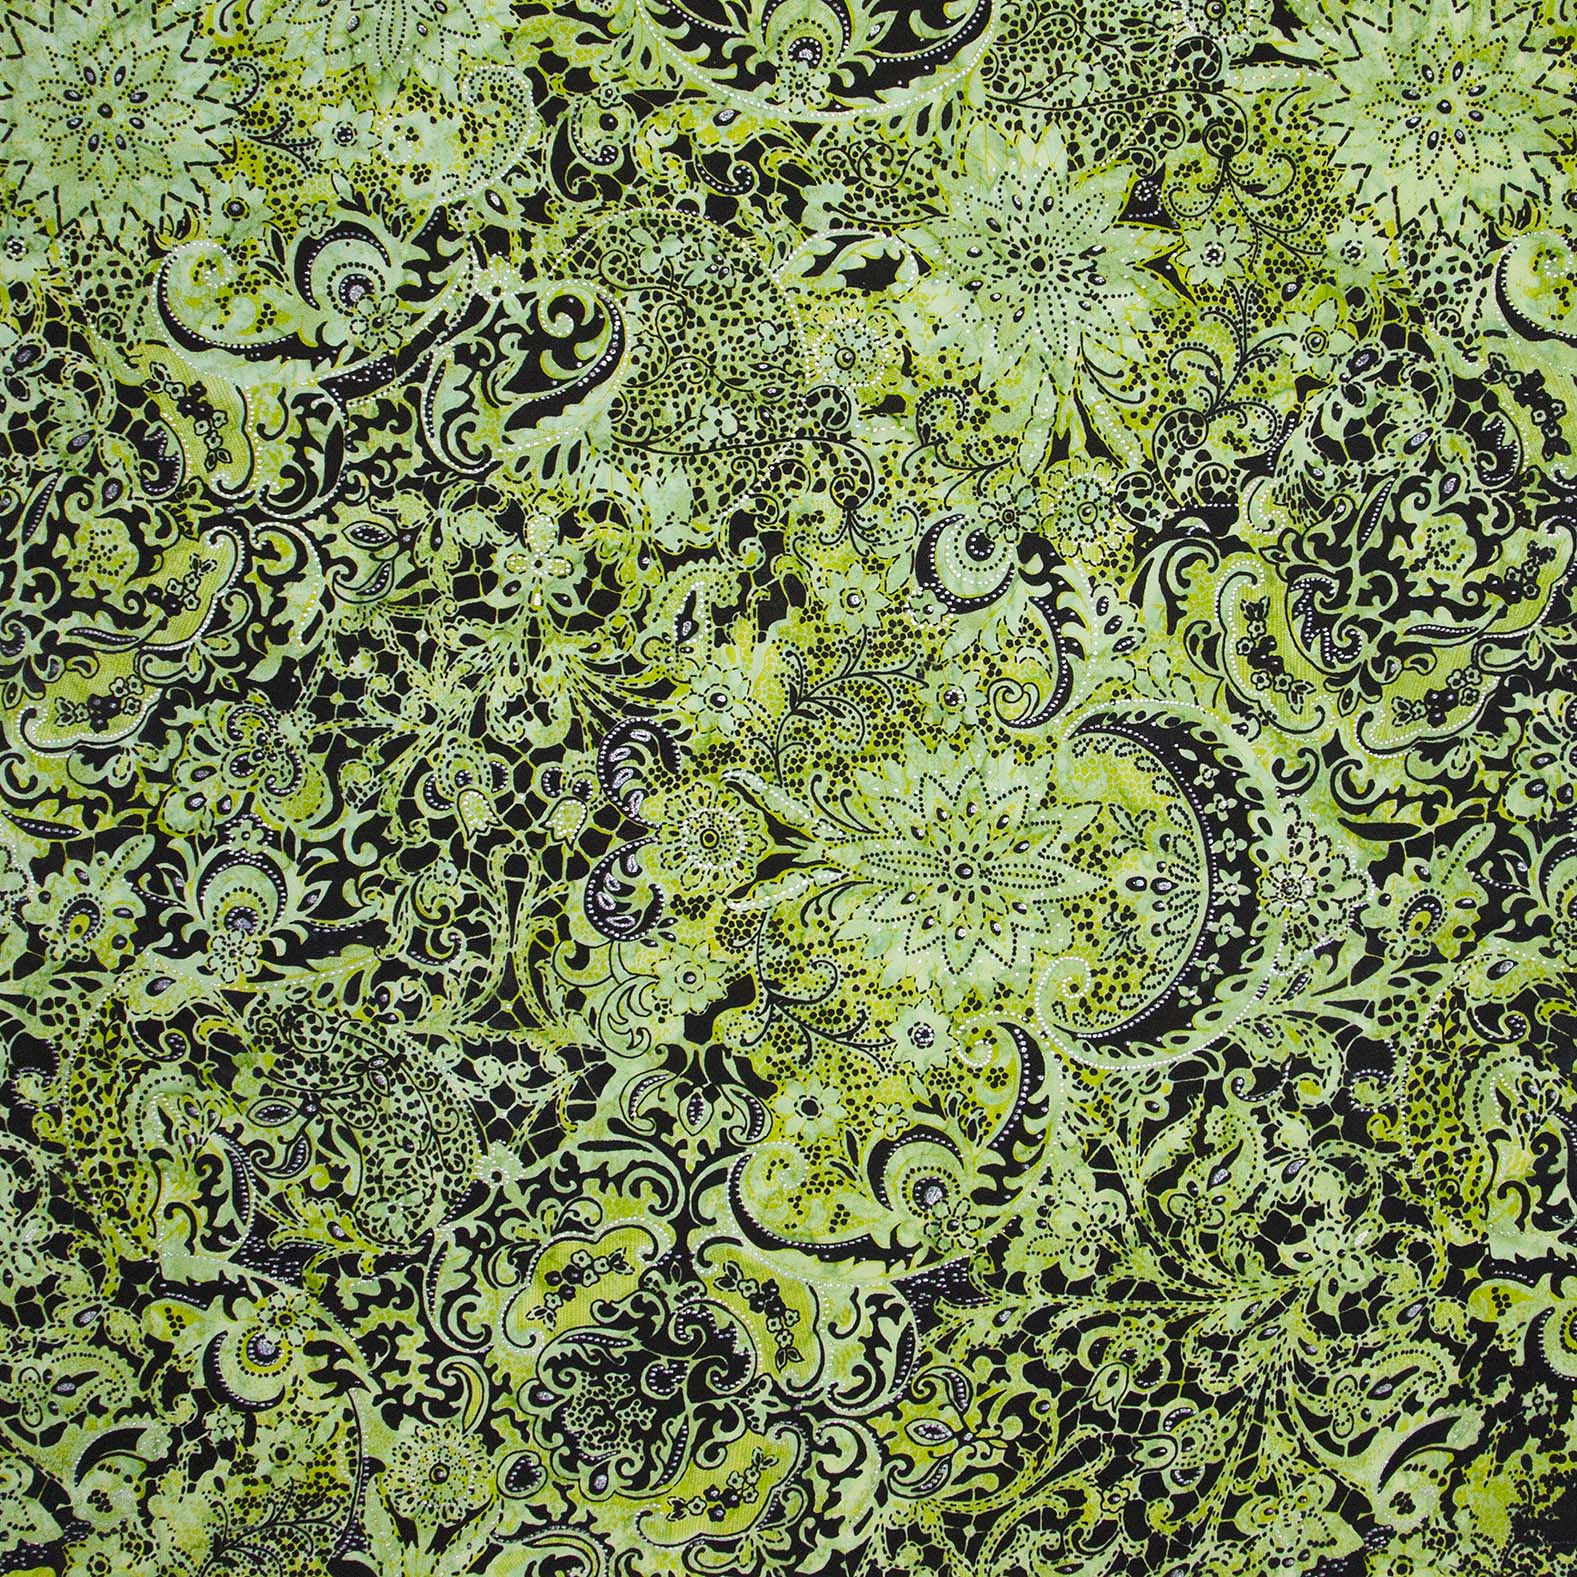 Apothecary Batik Quilt Fabric - Lustre in Bright Green - 81221-72